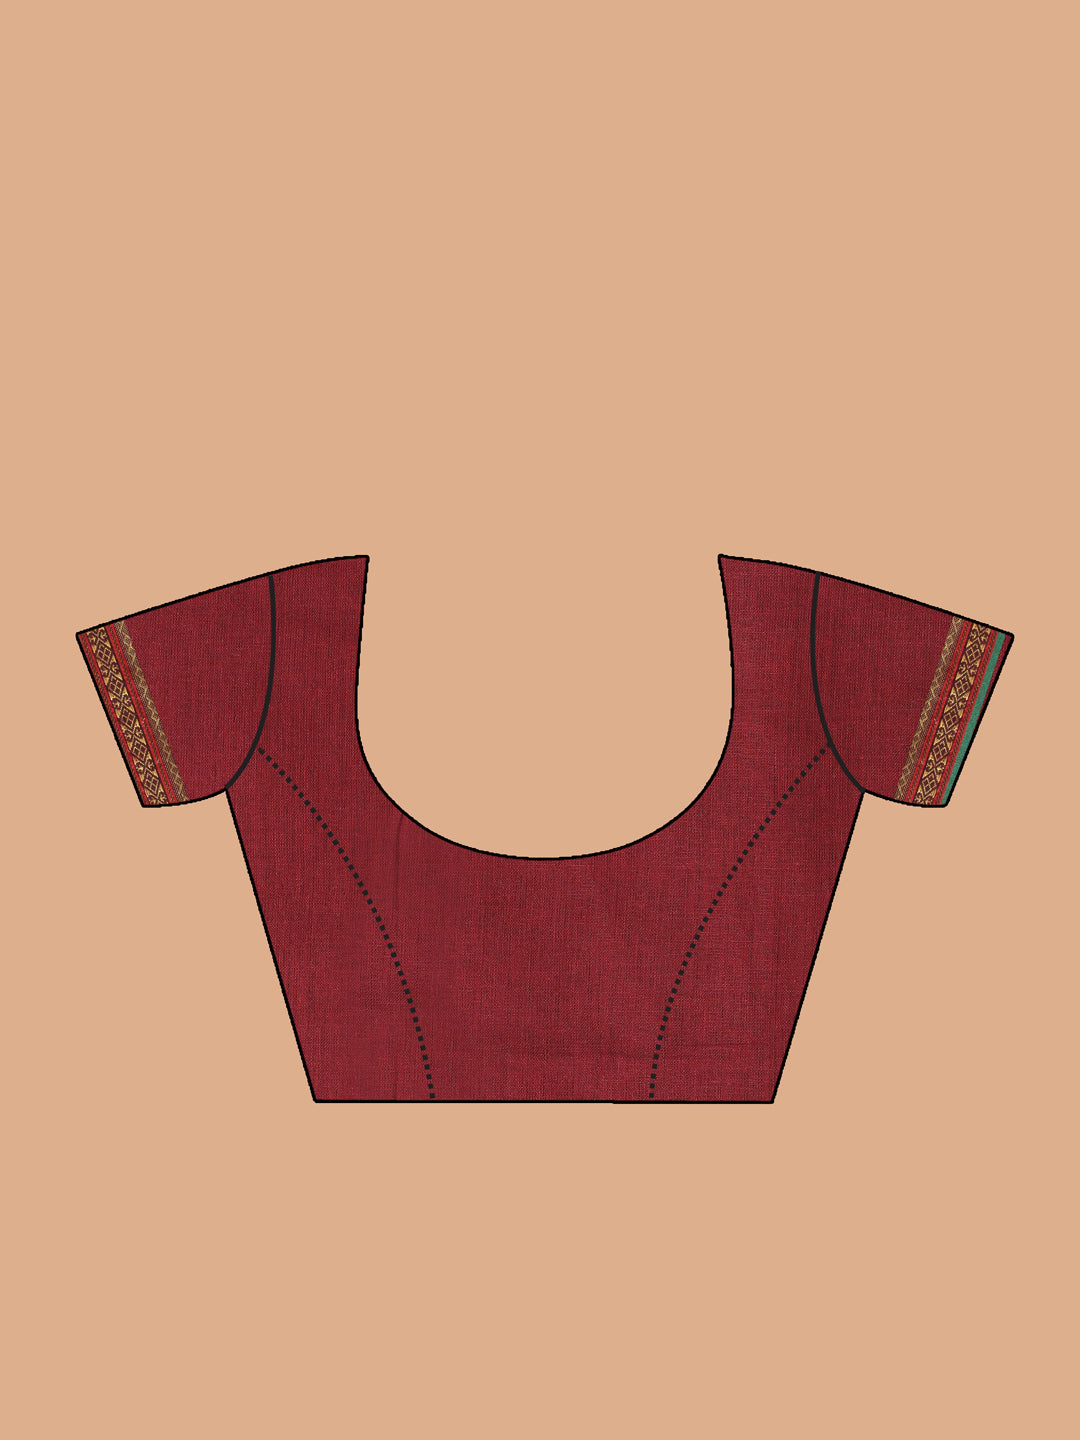 Indethnic Maroon Pure Cotton Solid Saree - Blouse Piece View